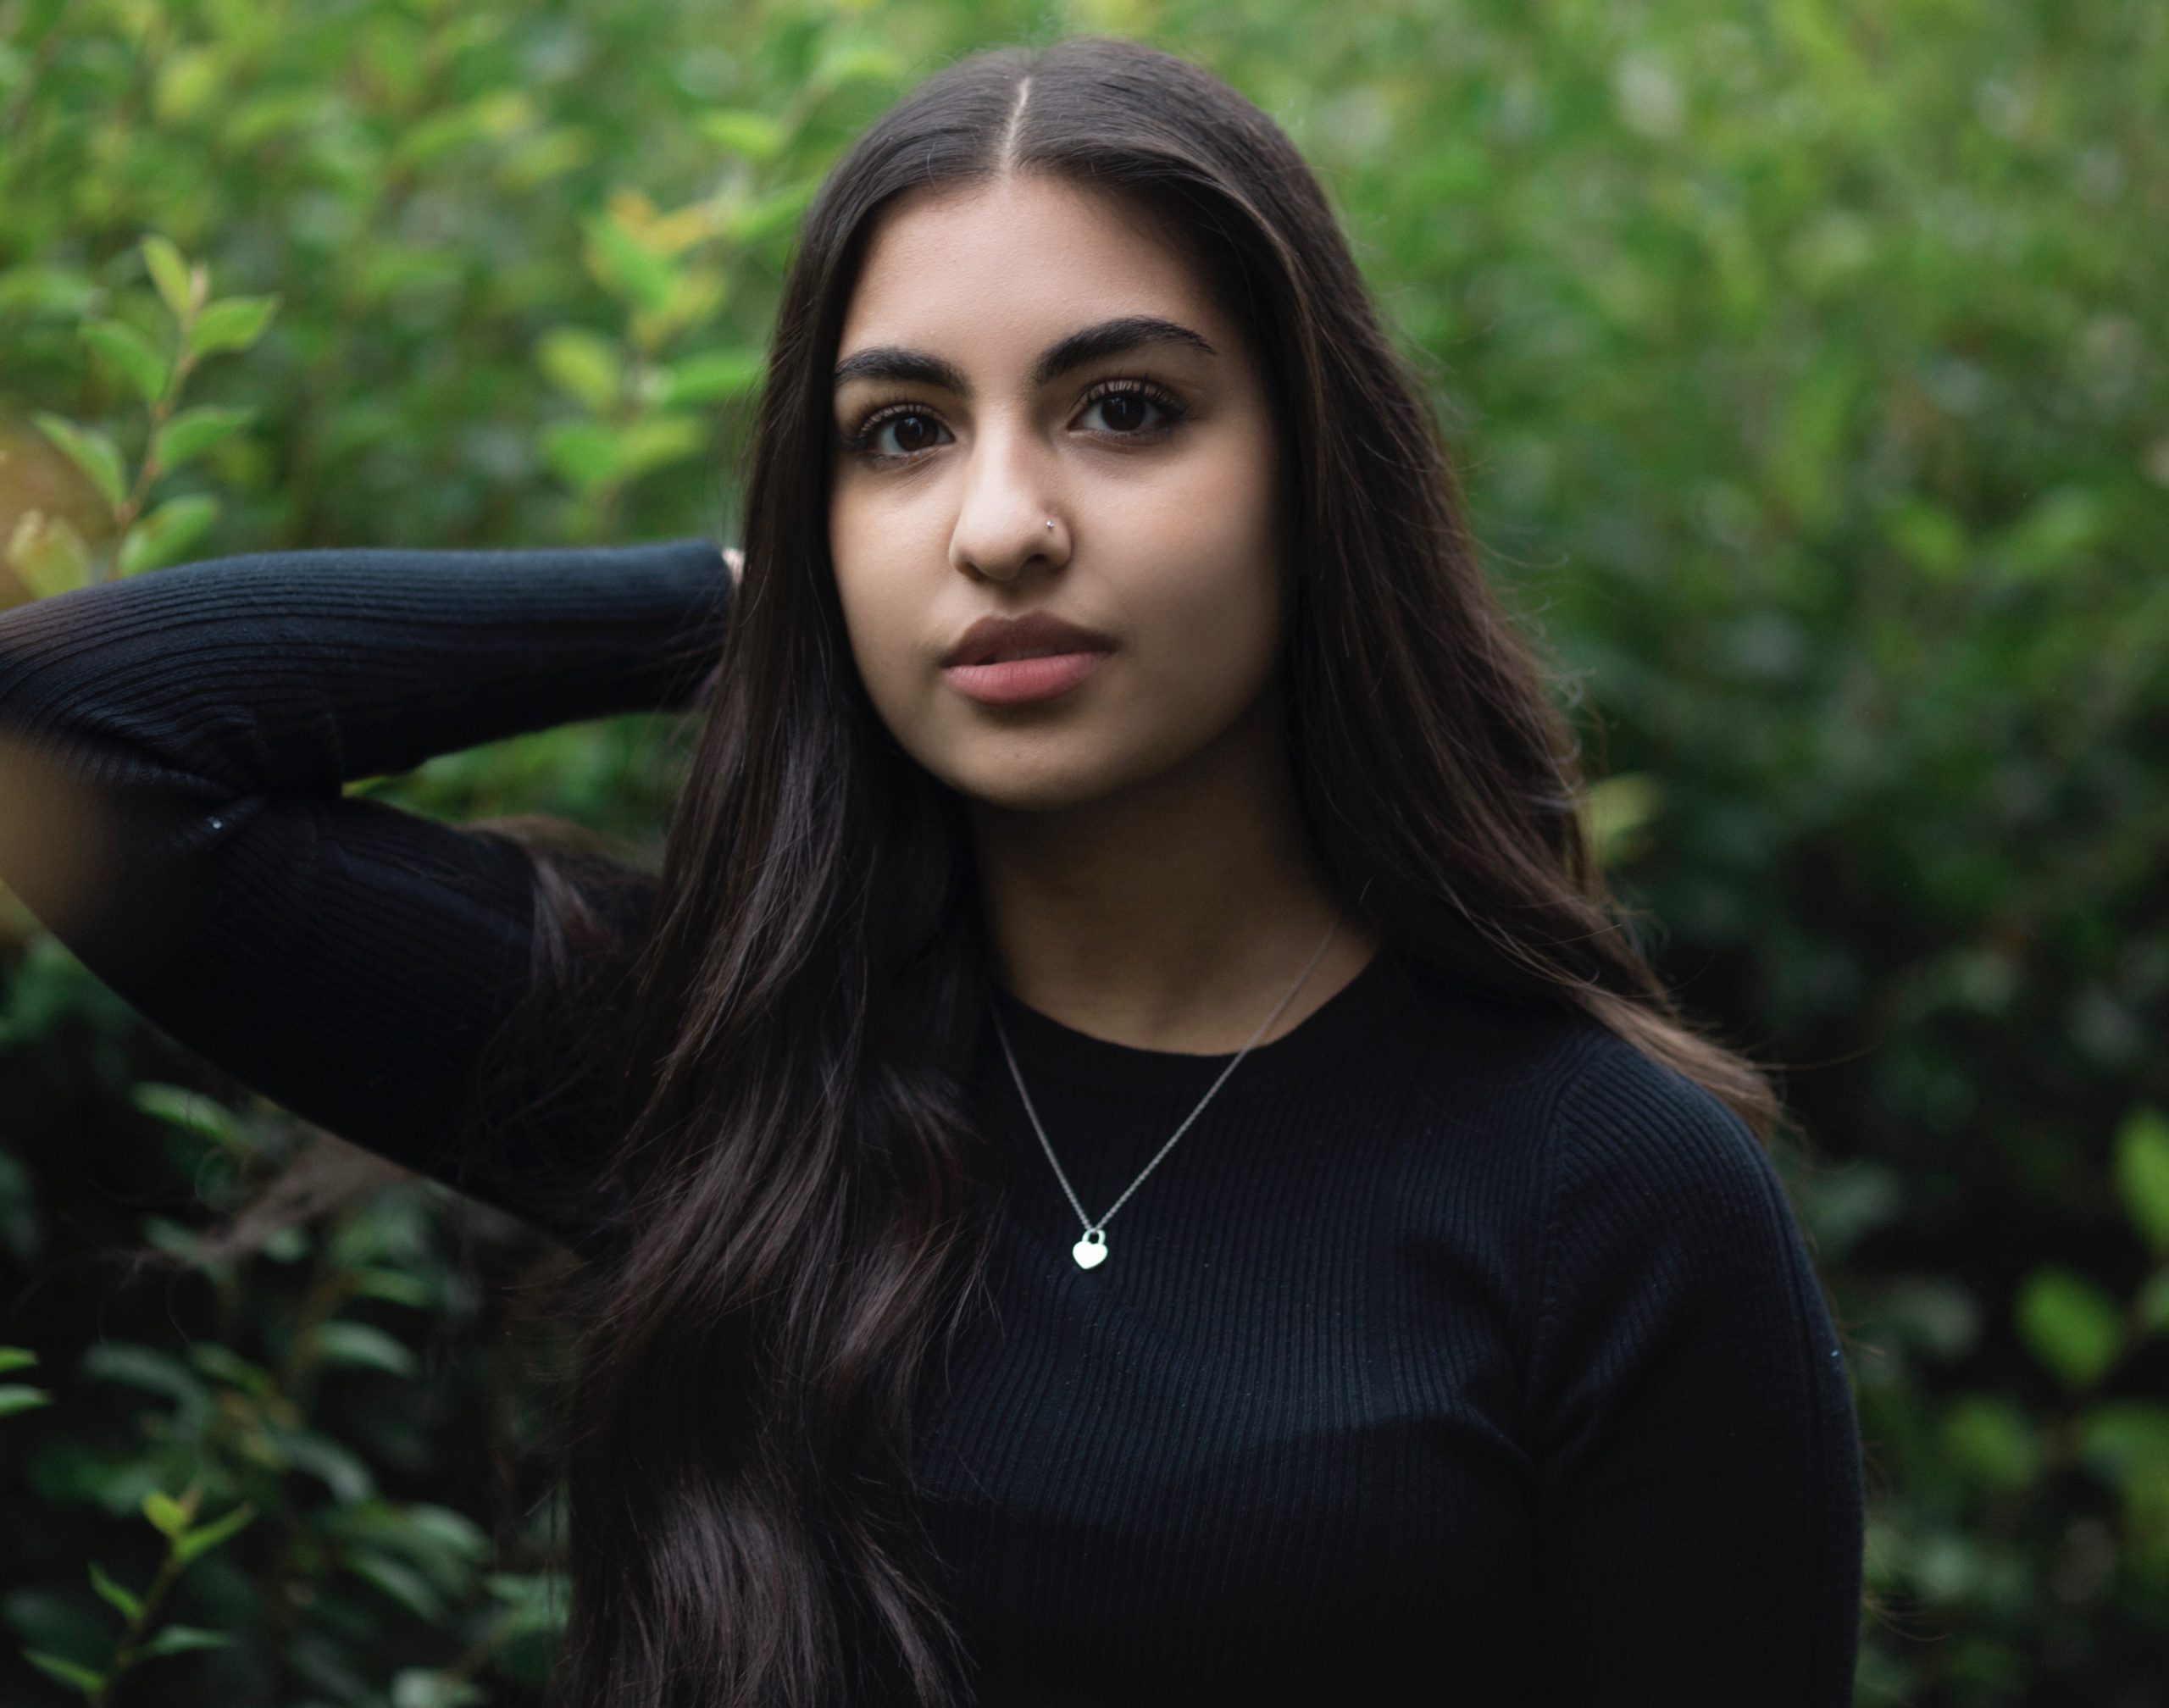 an image of Alysha Mohamed in a ribbed black shirt and a small silver necklace, standing in front of lush greenery with one arm up and bent.